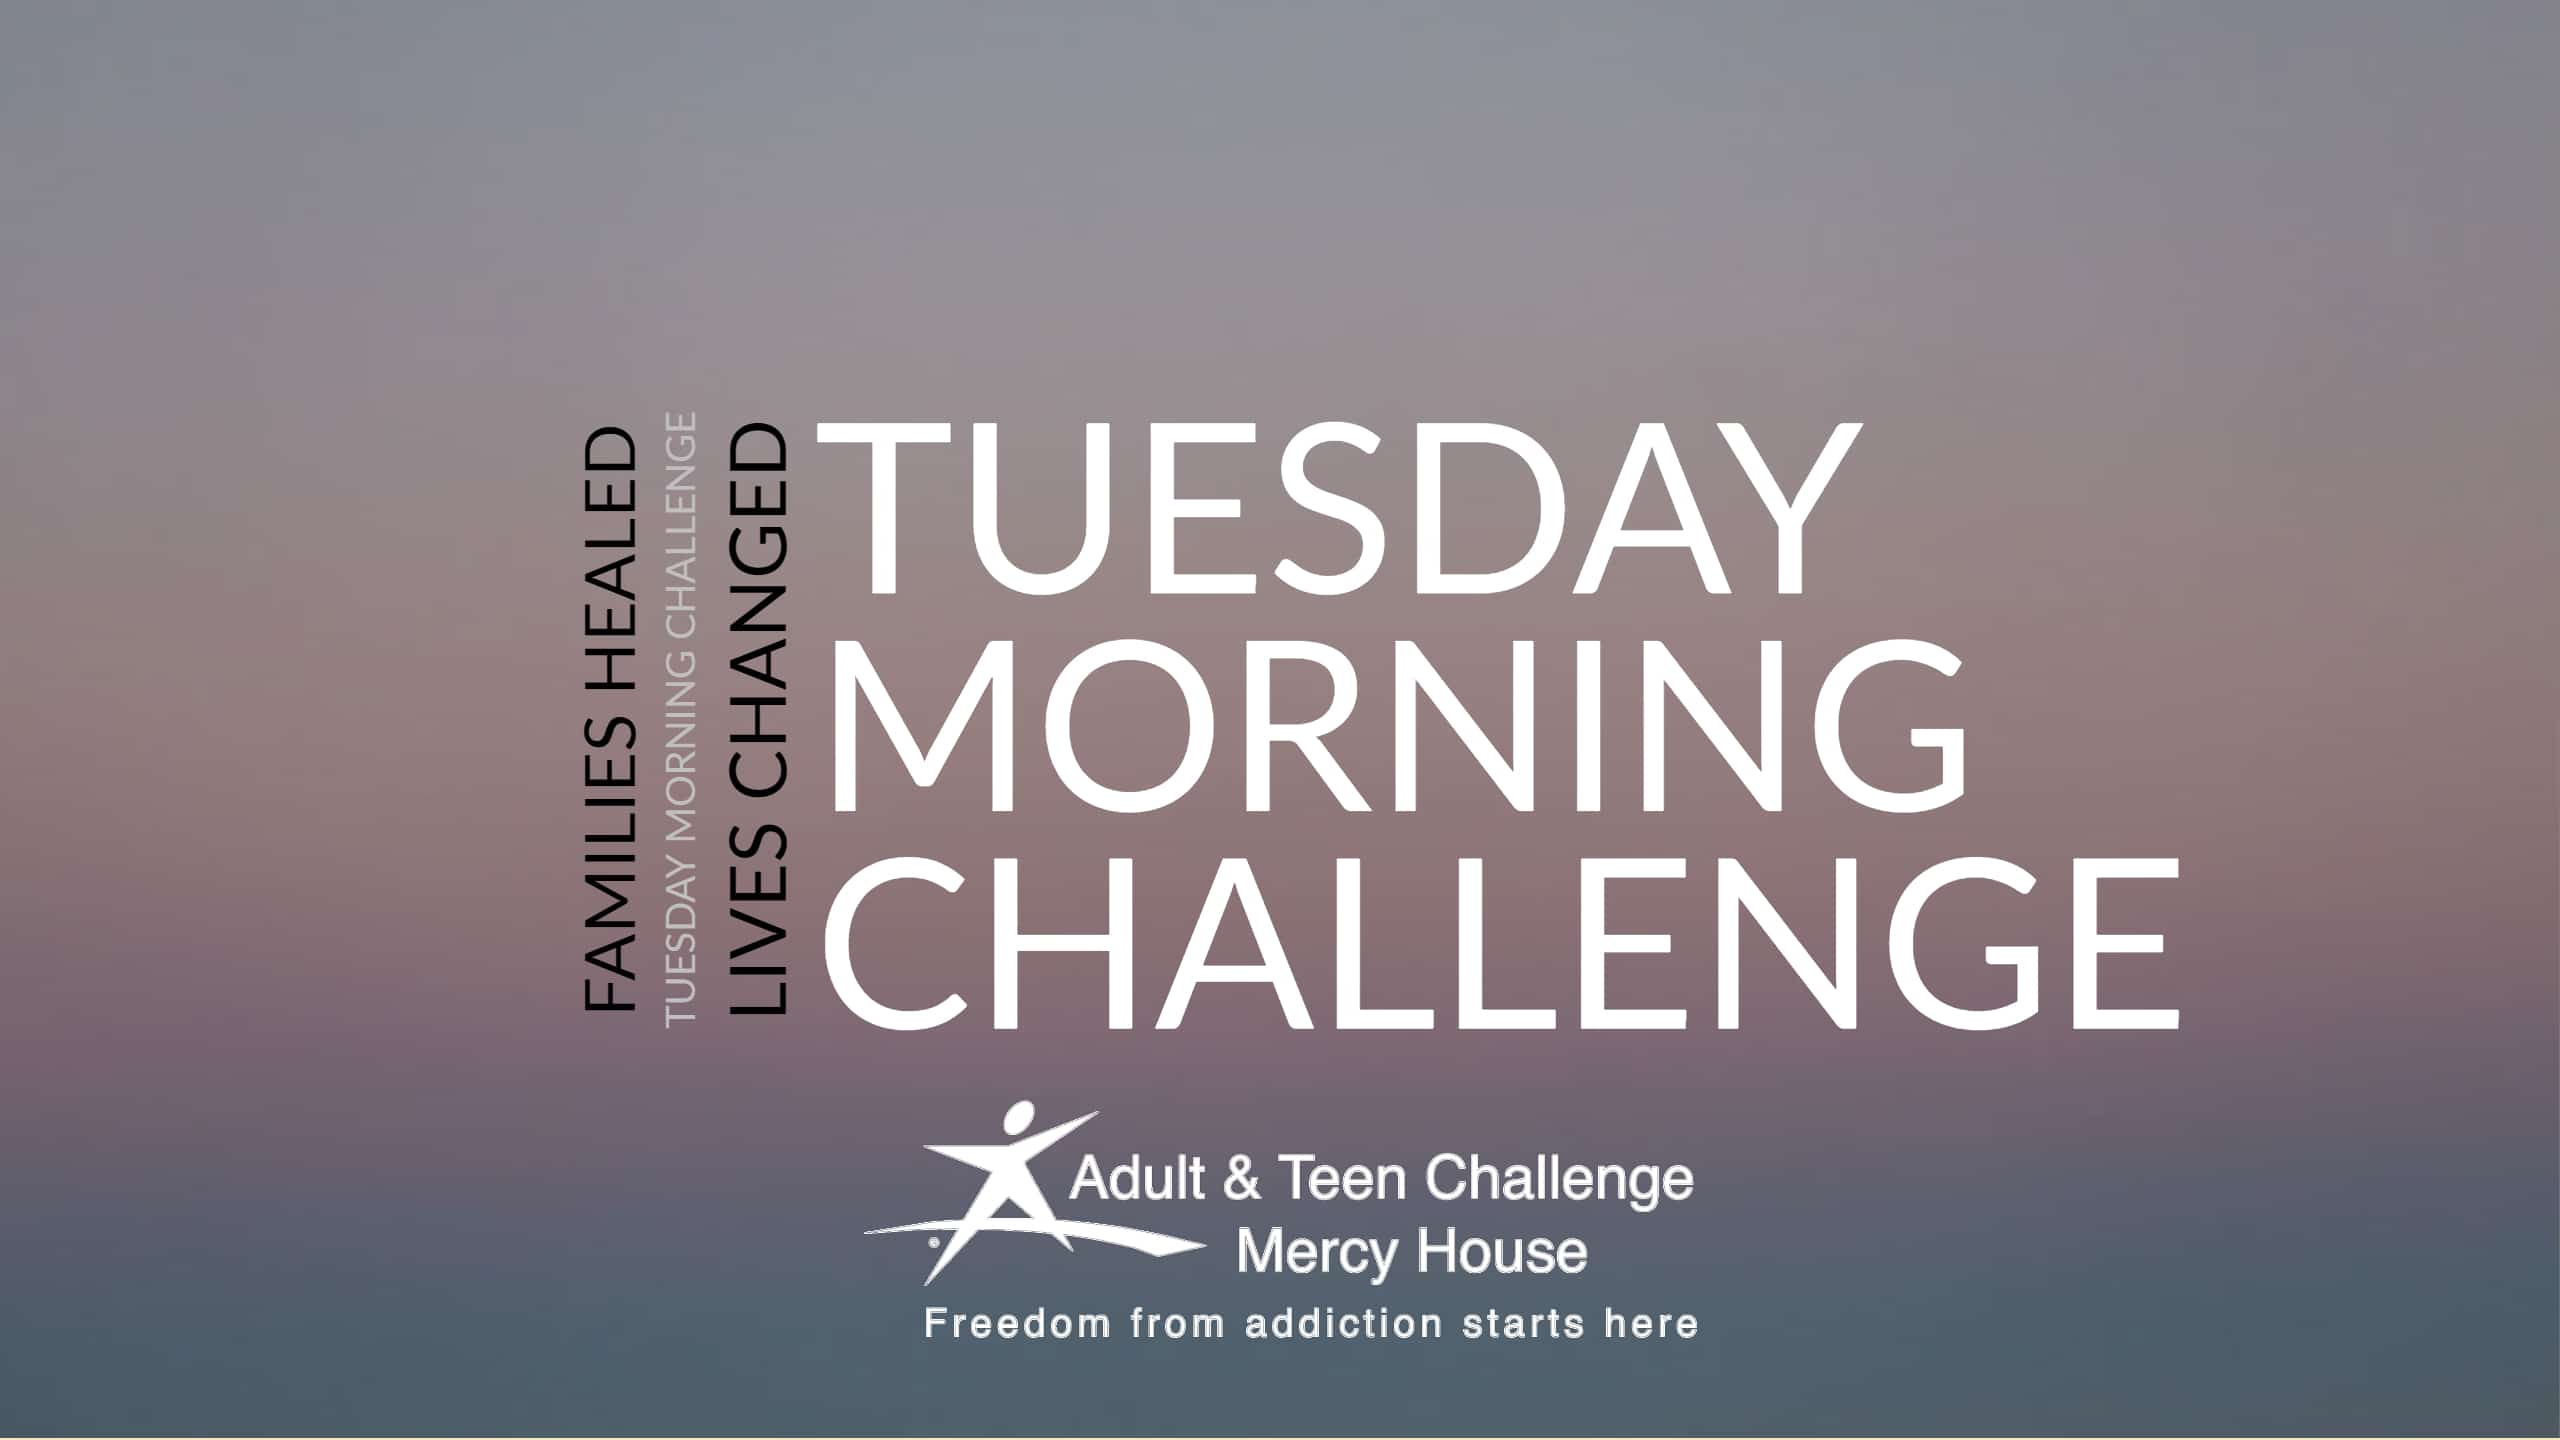 Tuesday Morning Challenge – Is Your Life Increasing?